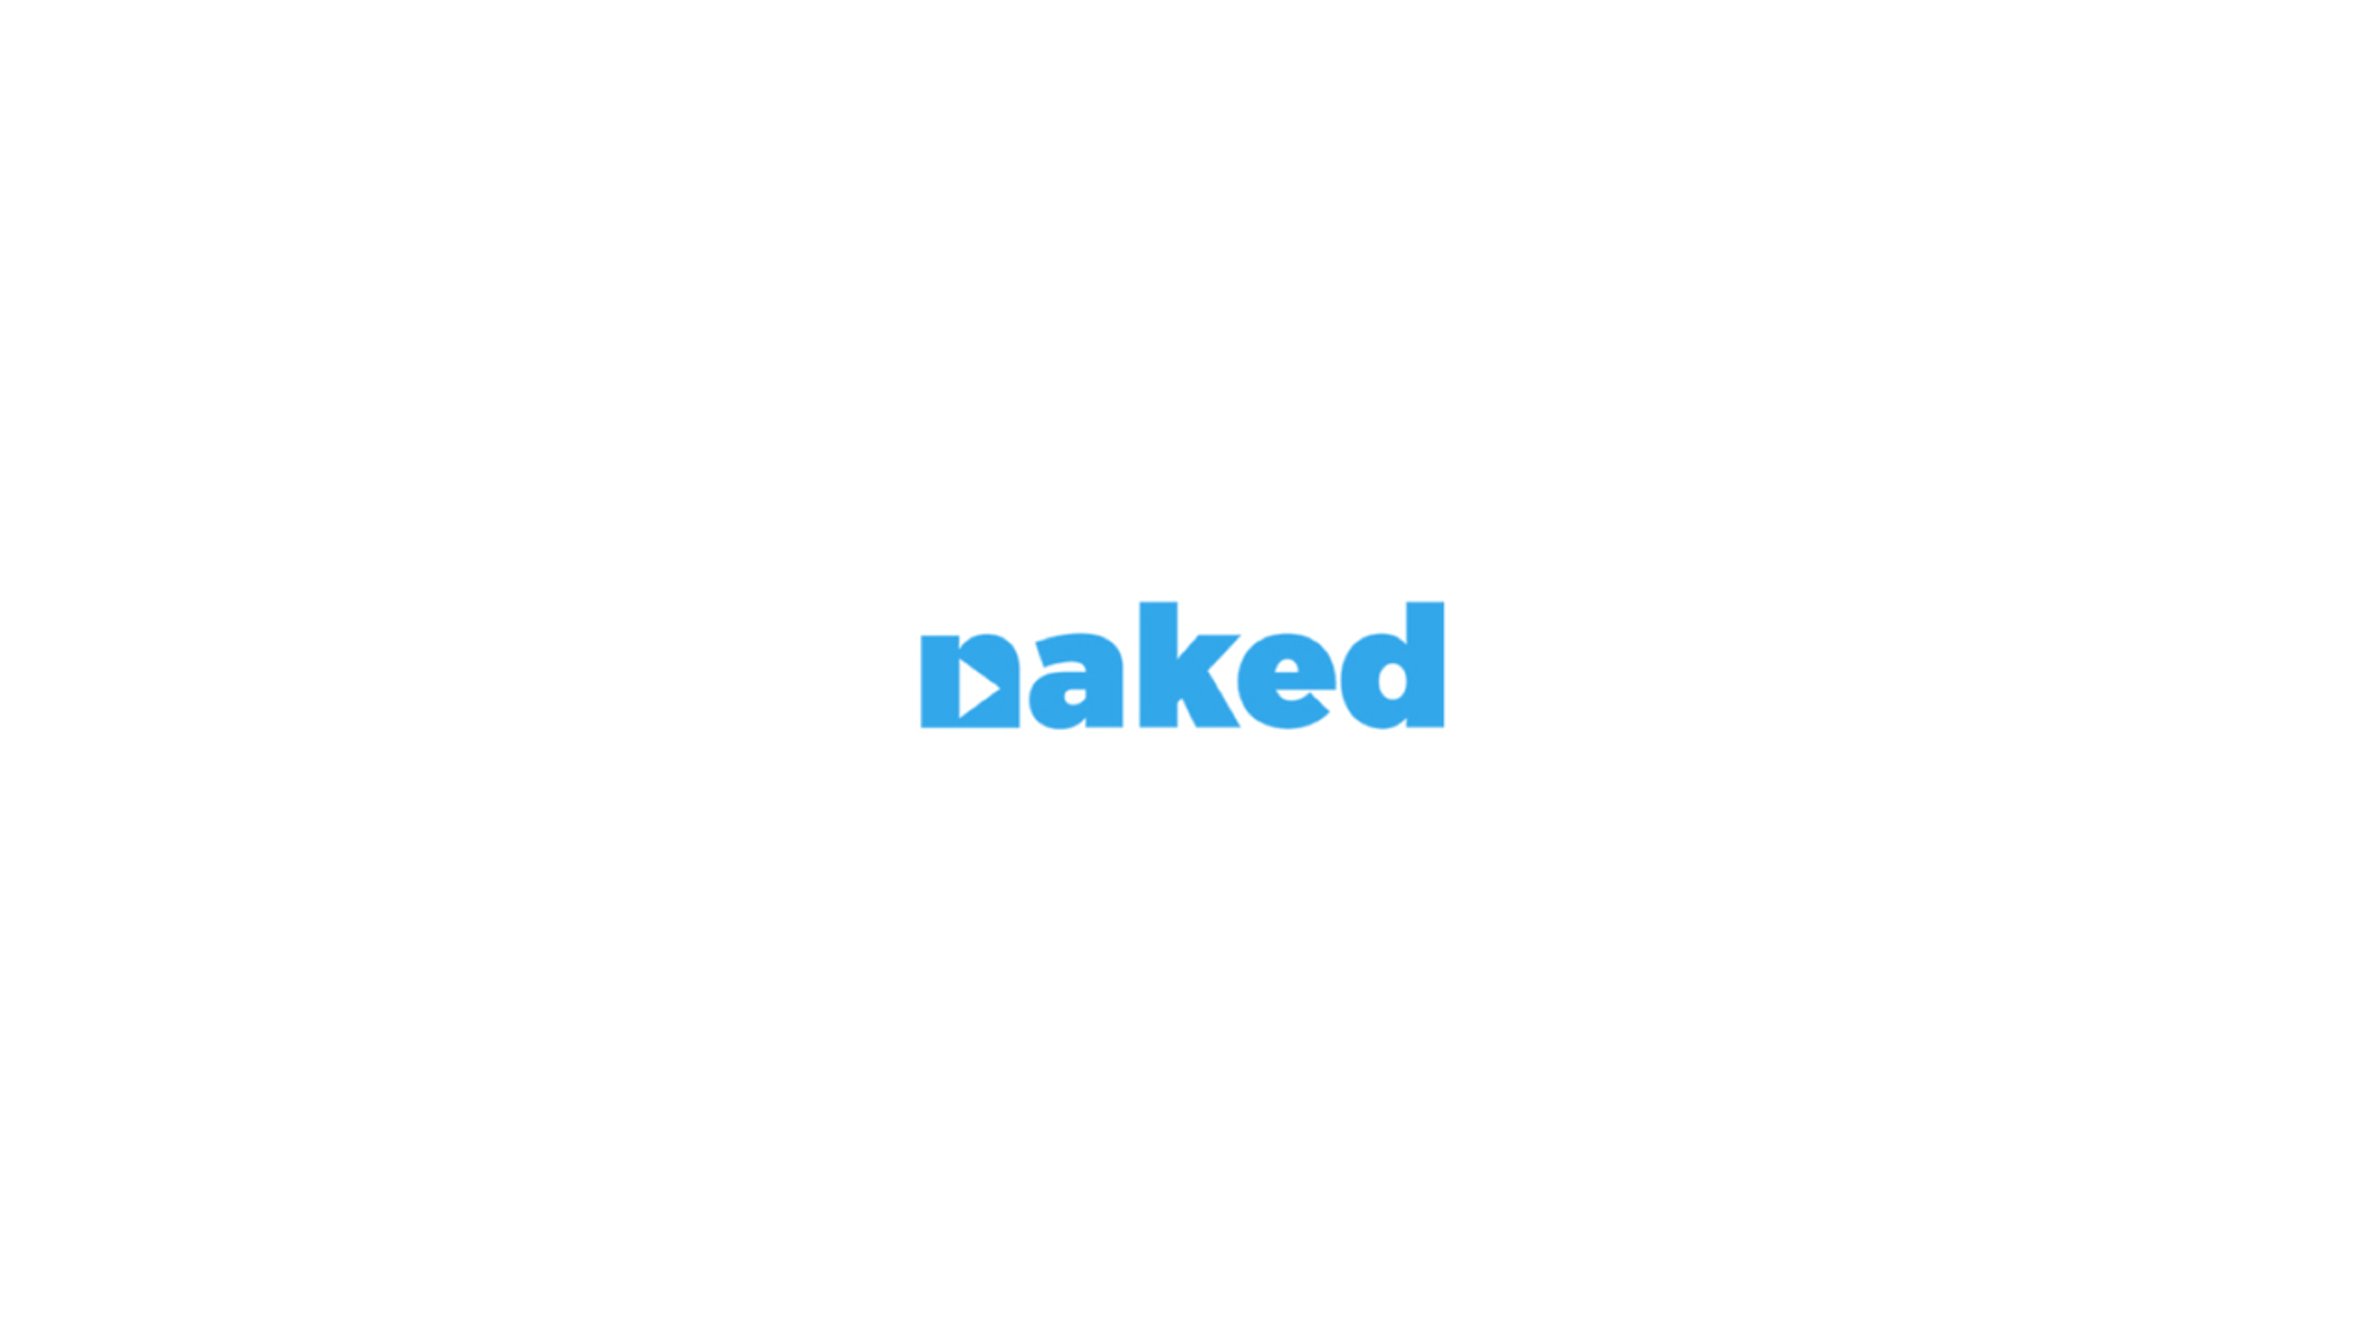 Production Company Naked needs YOU for a respected US Network Pilot!